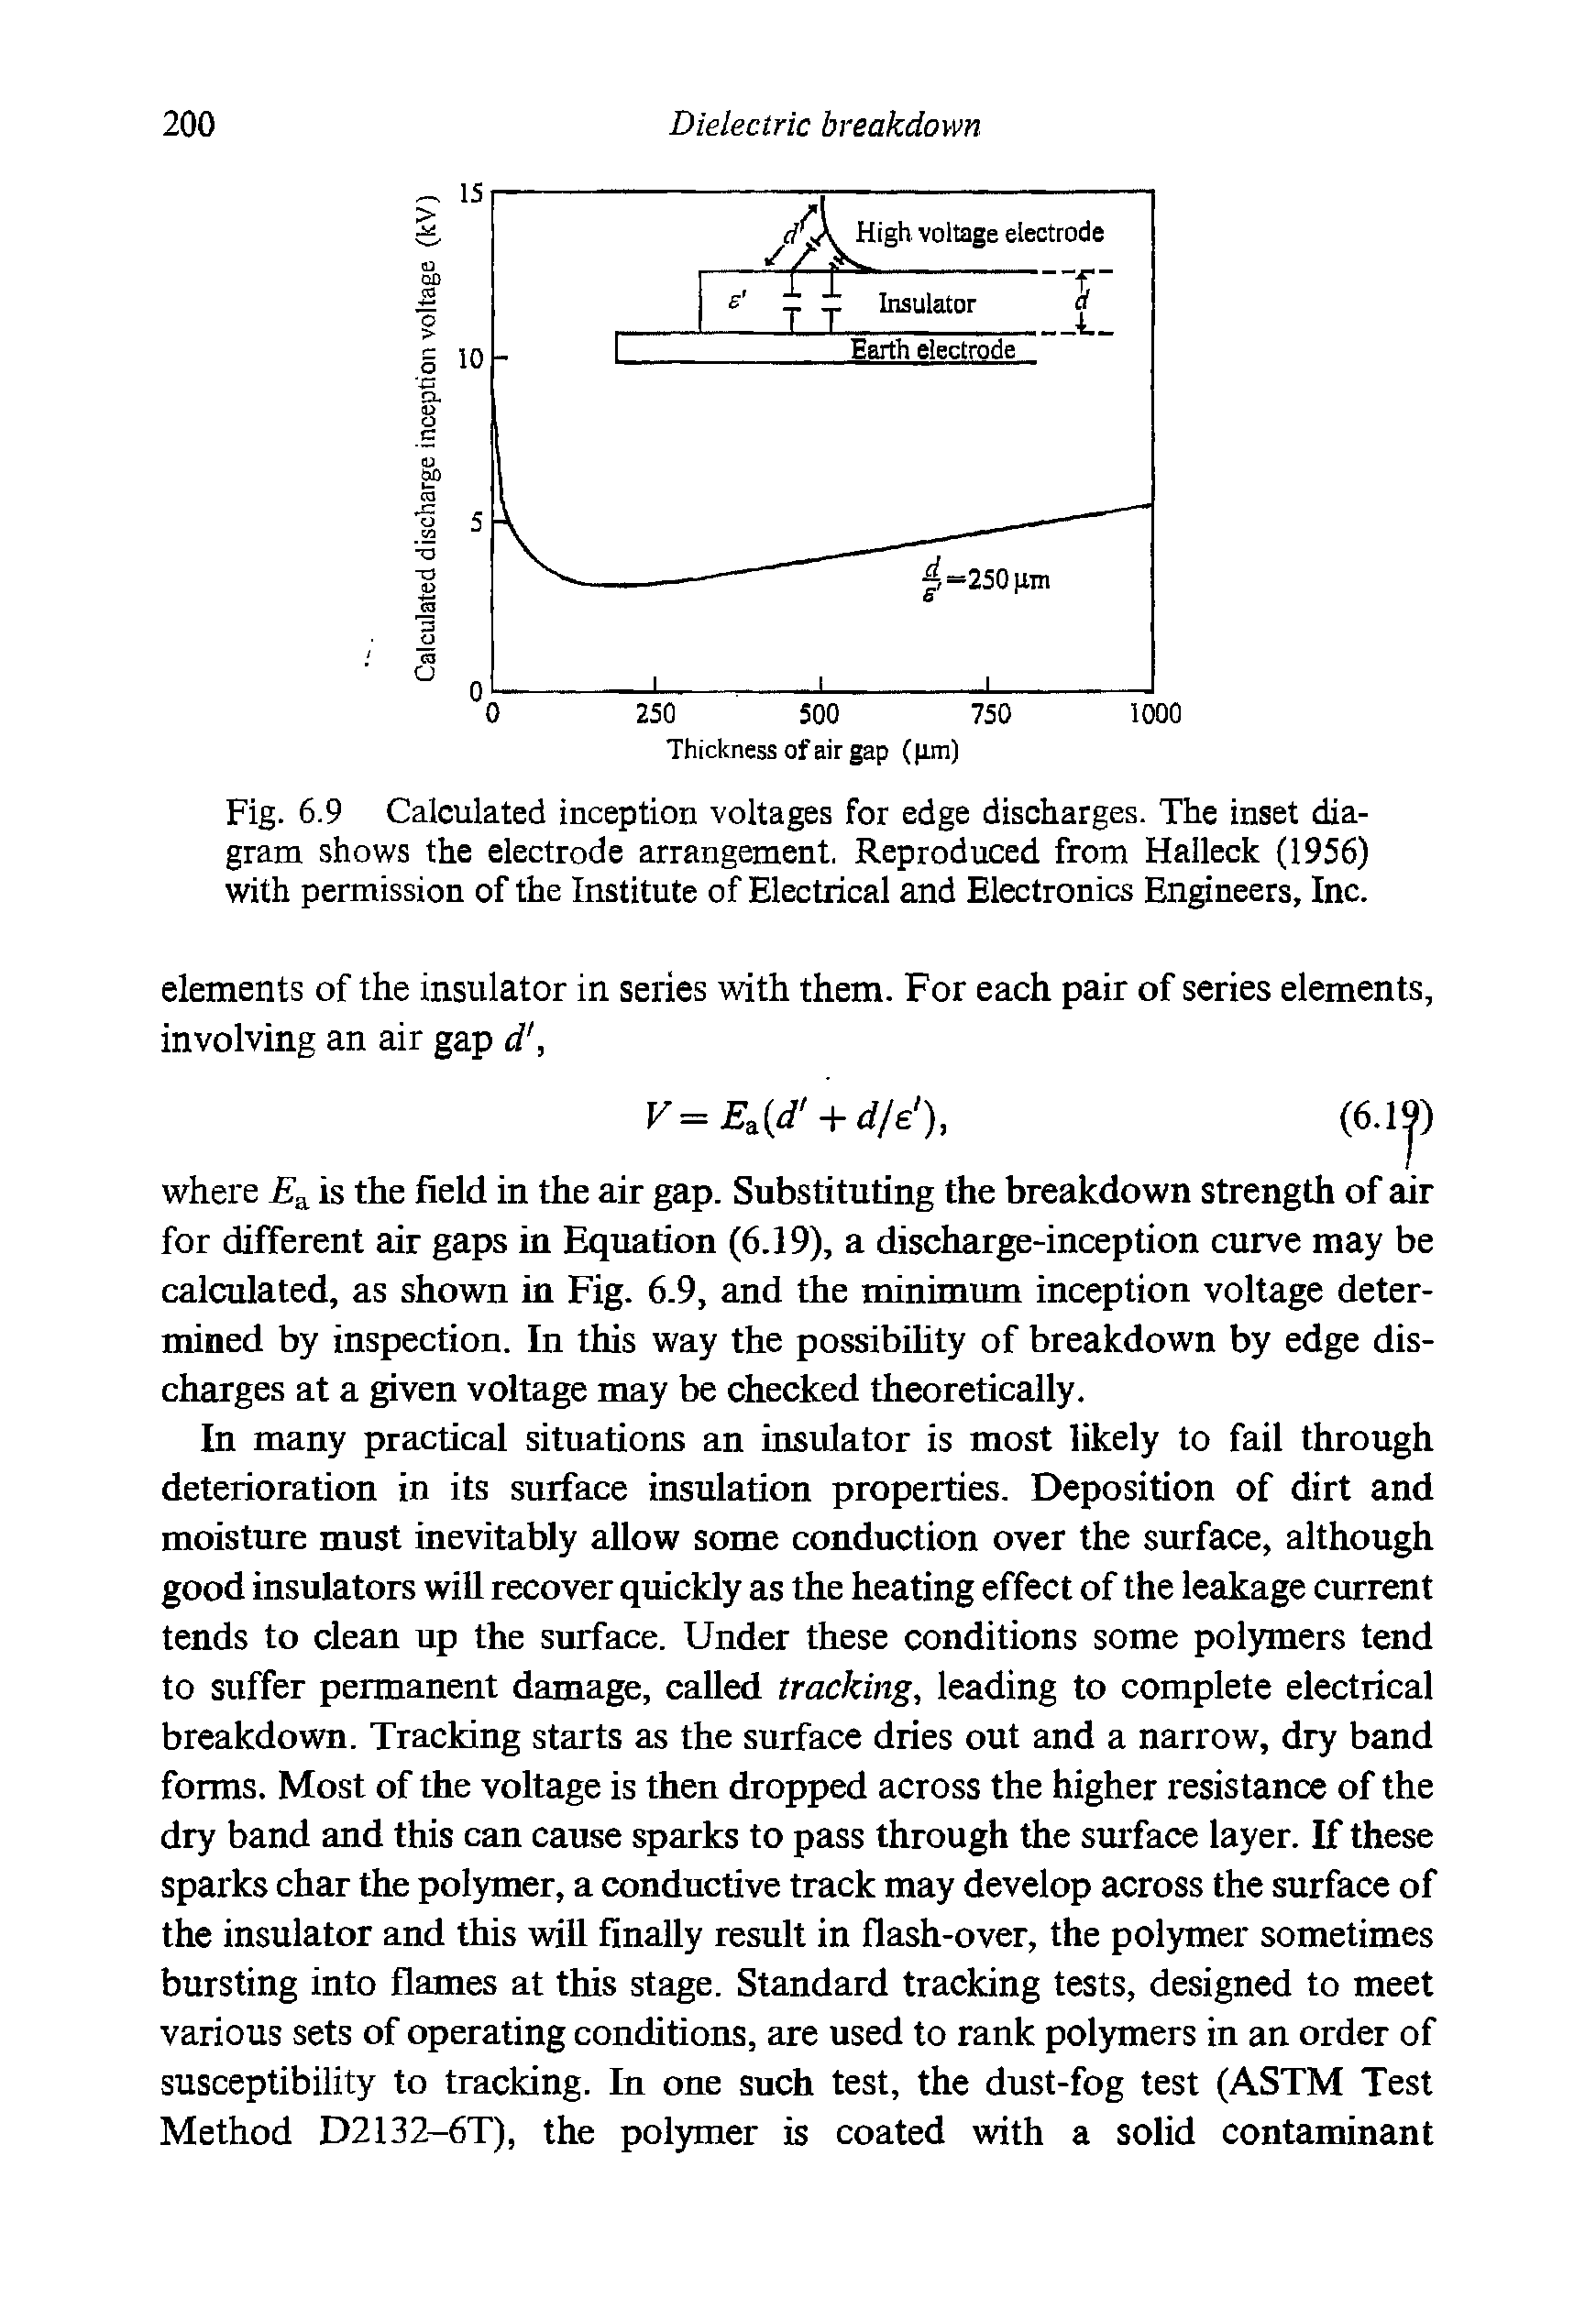 Fig. 6.9 Calculated inception voltages for edge discharges. The inset diagram shows the electrode arrangement, Reproduced from Halleck (1956) with permission of the Institute of Electrical and Electronics Engineers, Inc.